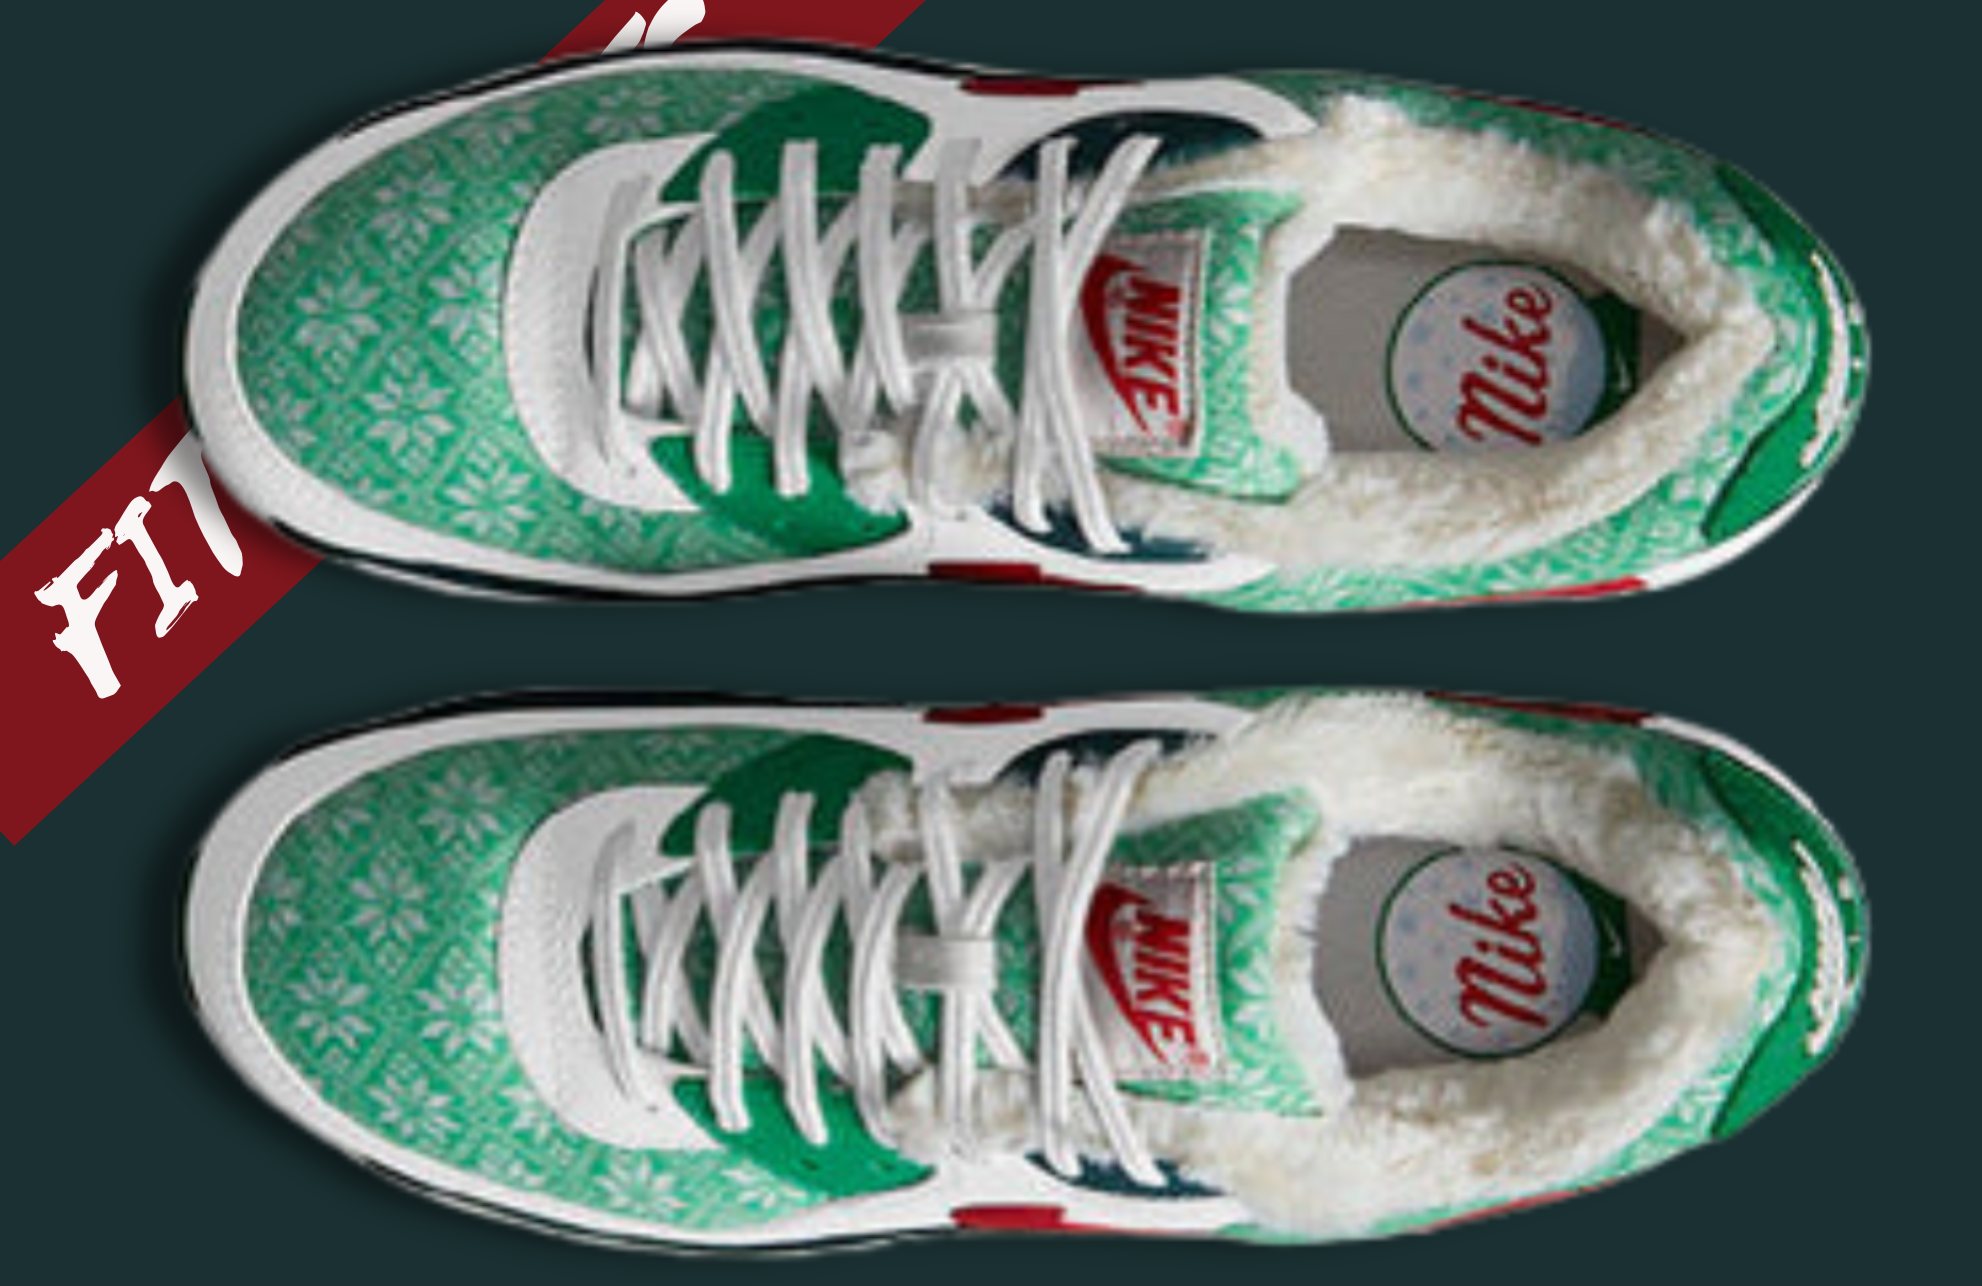 Nike Air Max Low Christmas Sweater